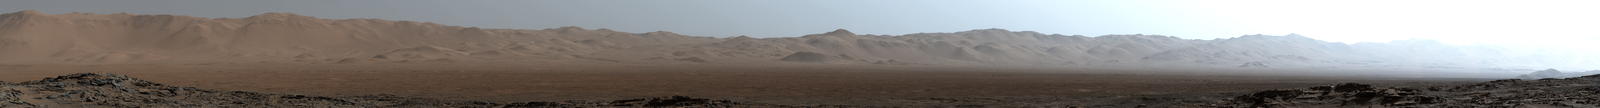 Northern Portion of Gale Crater Rim Viewed from 'Naukluft Plateau'